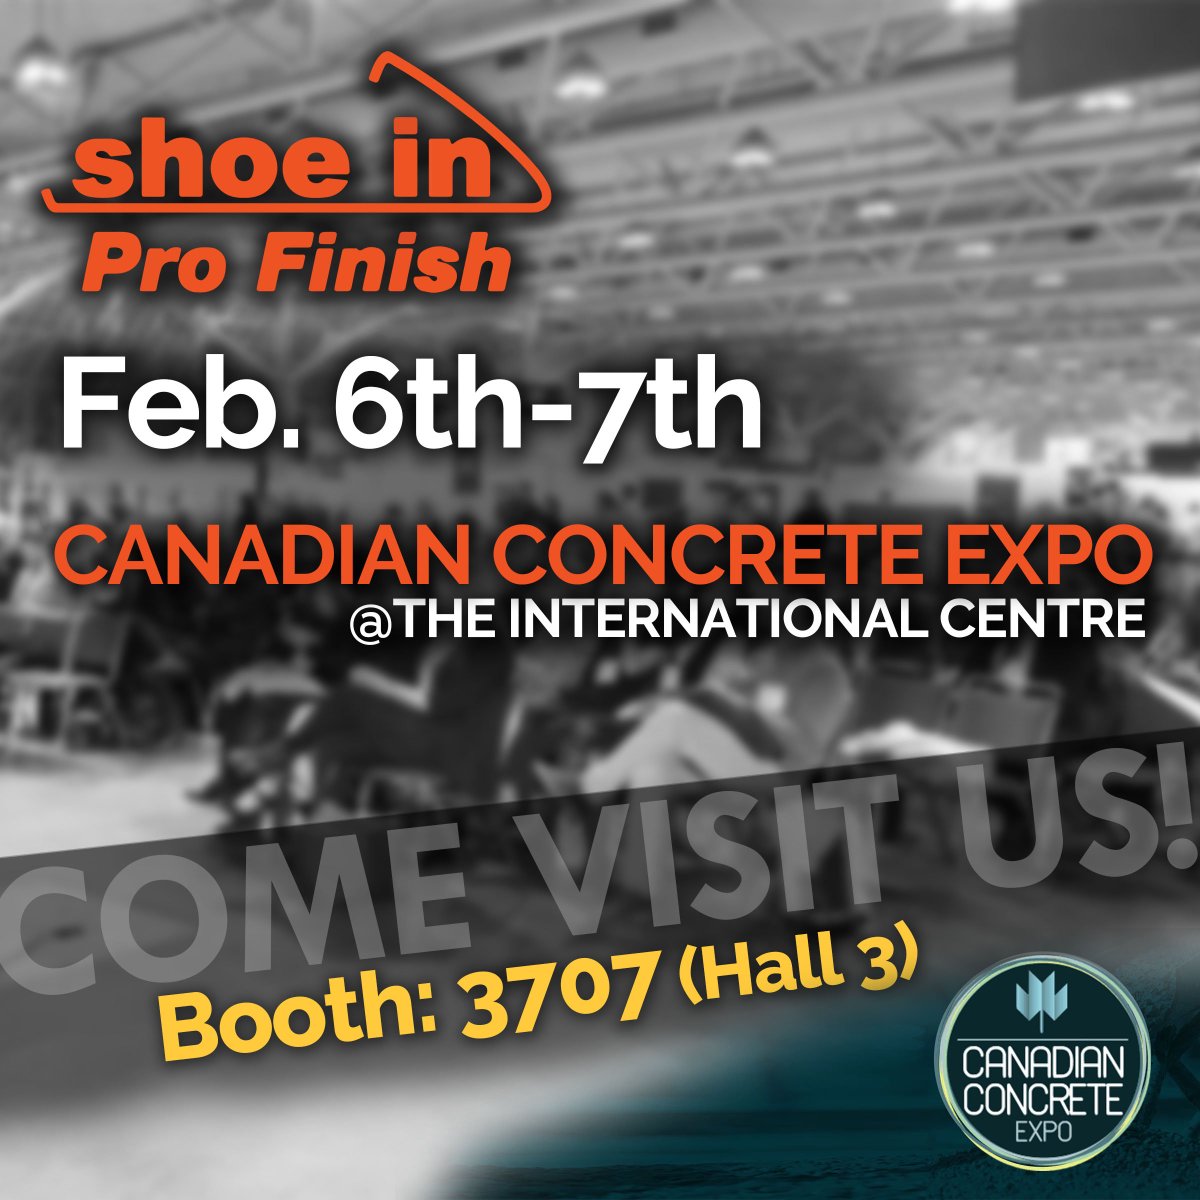 It's time for another show! ---- The #CanadianConcreteExpo 👈
Come VISIT US!
🔜Feb 6th-7th, Canadian Concrete Expo @ The International Centre.

#ShoeInCanada #ShoeInFinishingShoes #concretefinishing #concretestamping #construction #constructionworker #homerenovation  #homebuilder